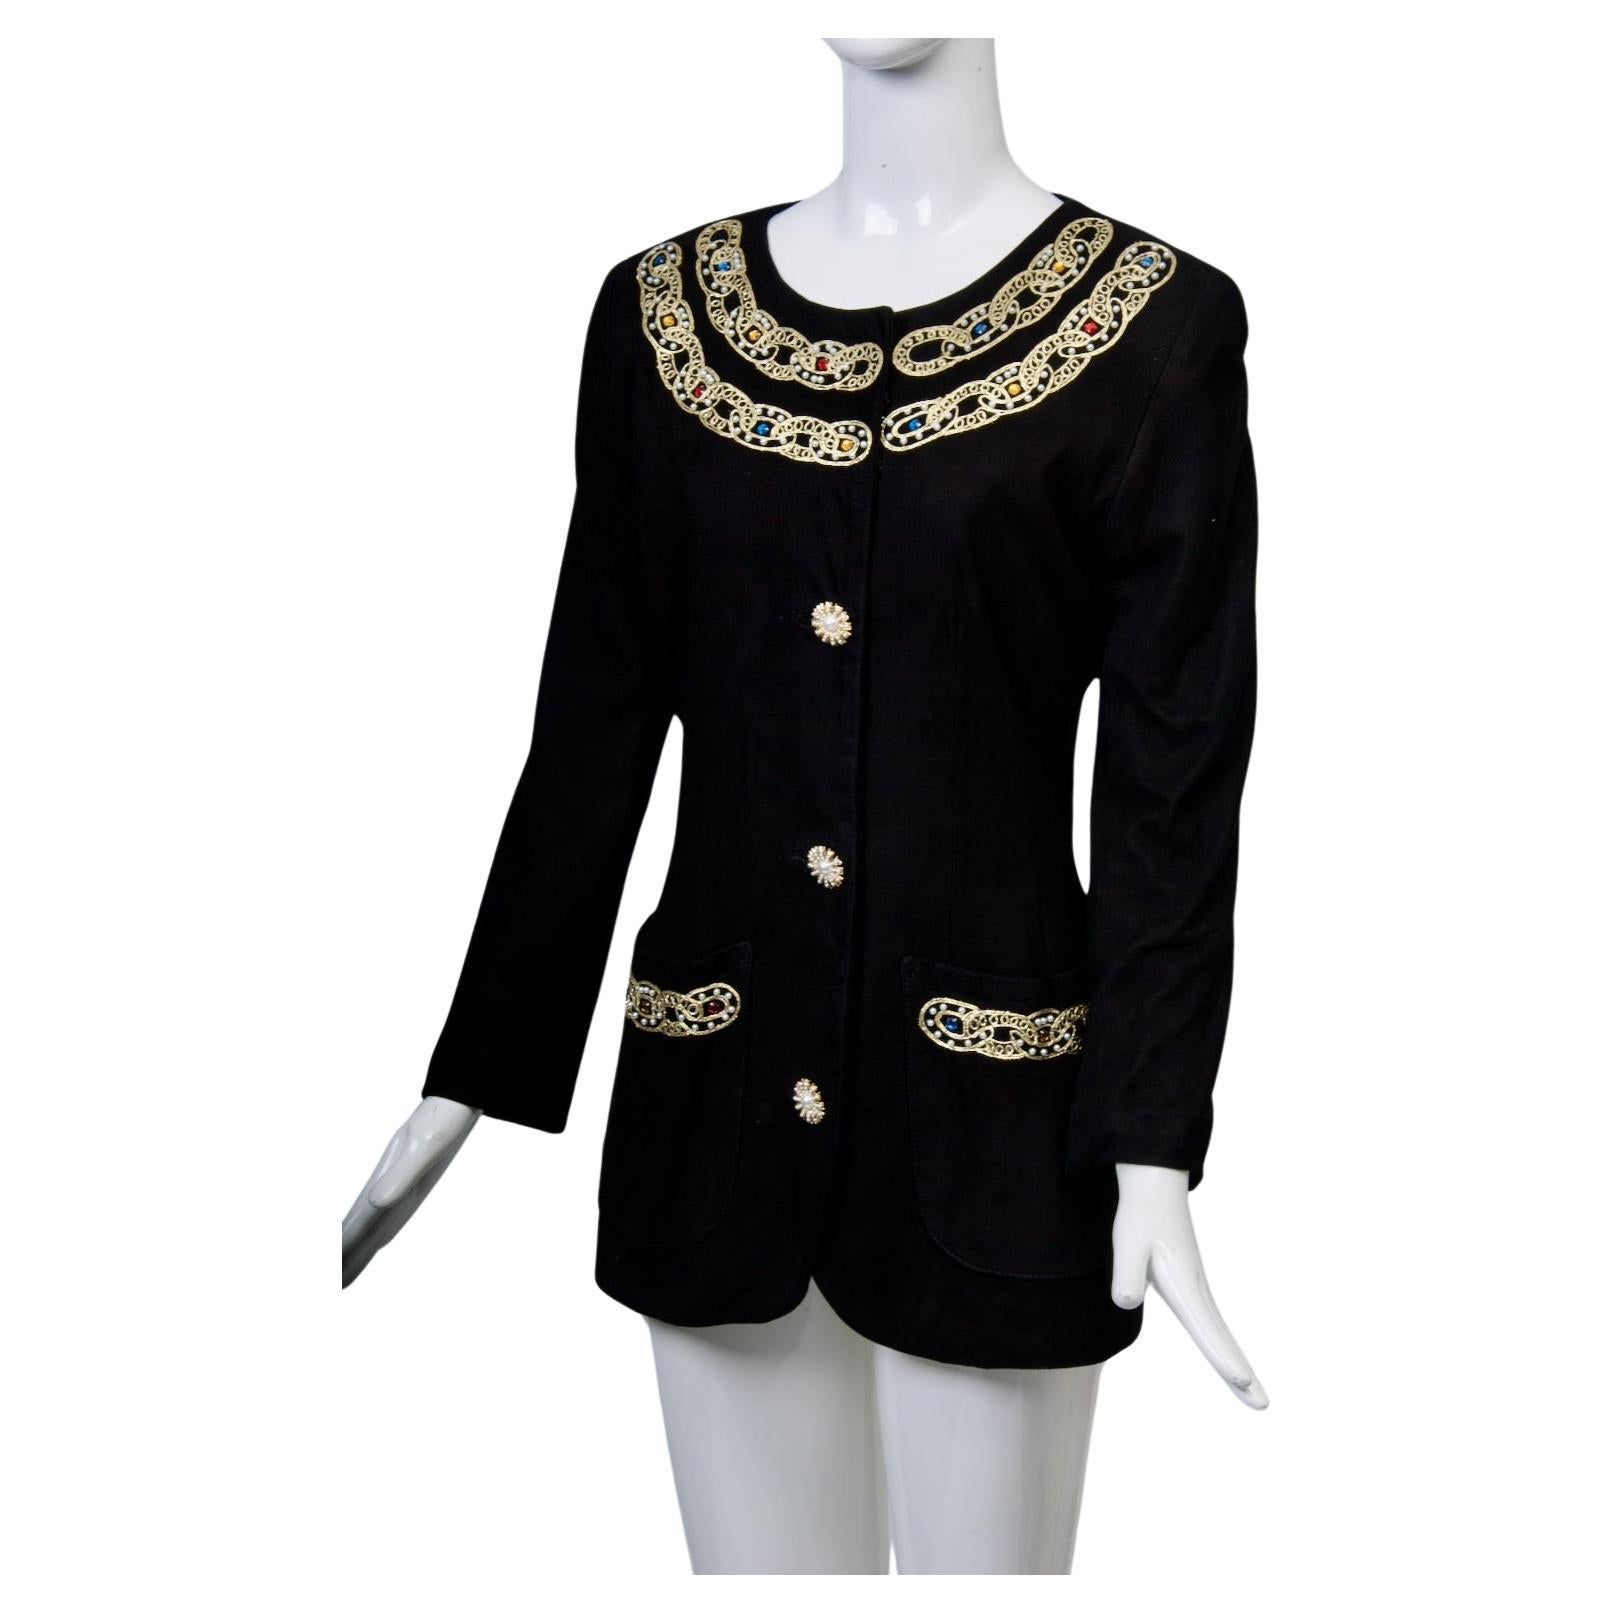 Vakko Black Suede Jacket with Gold and Stone Trim For Sale